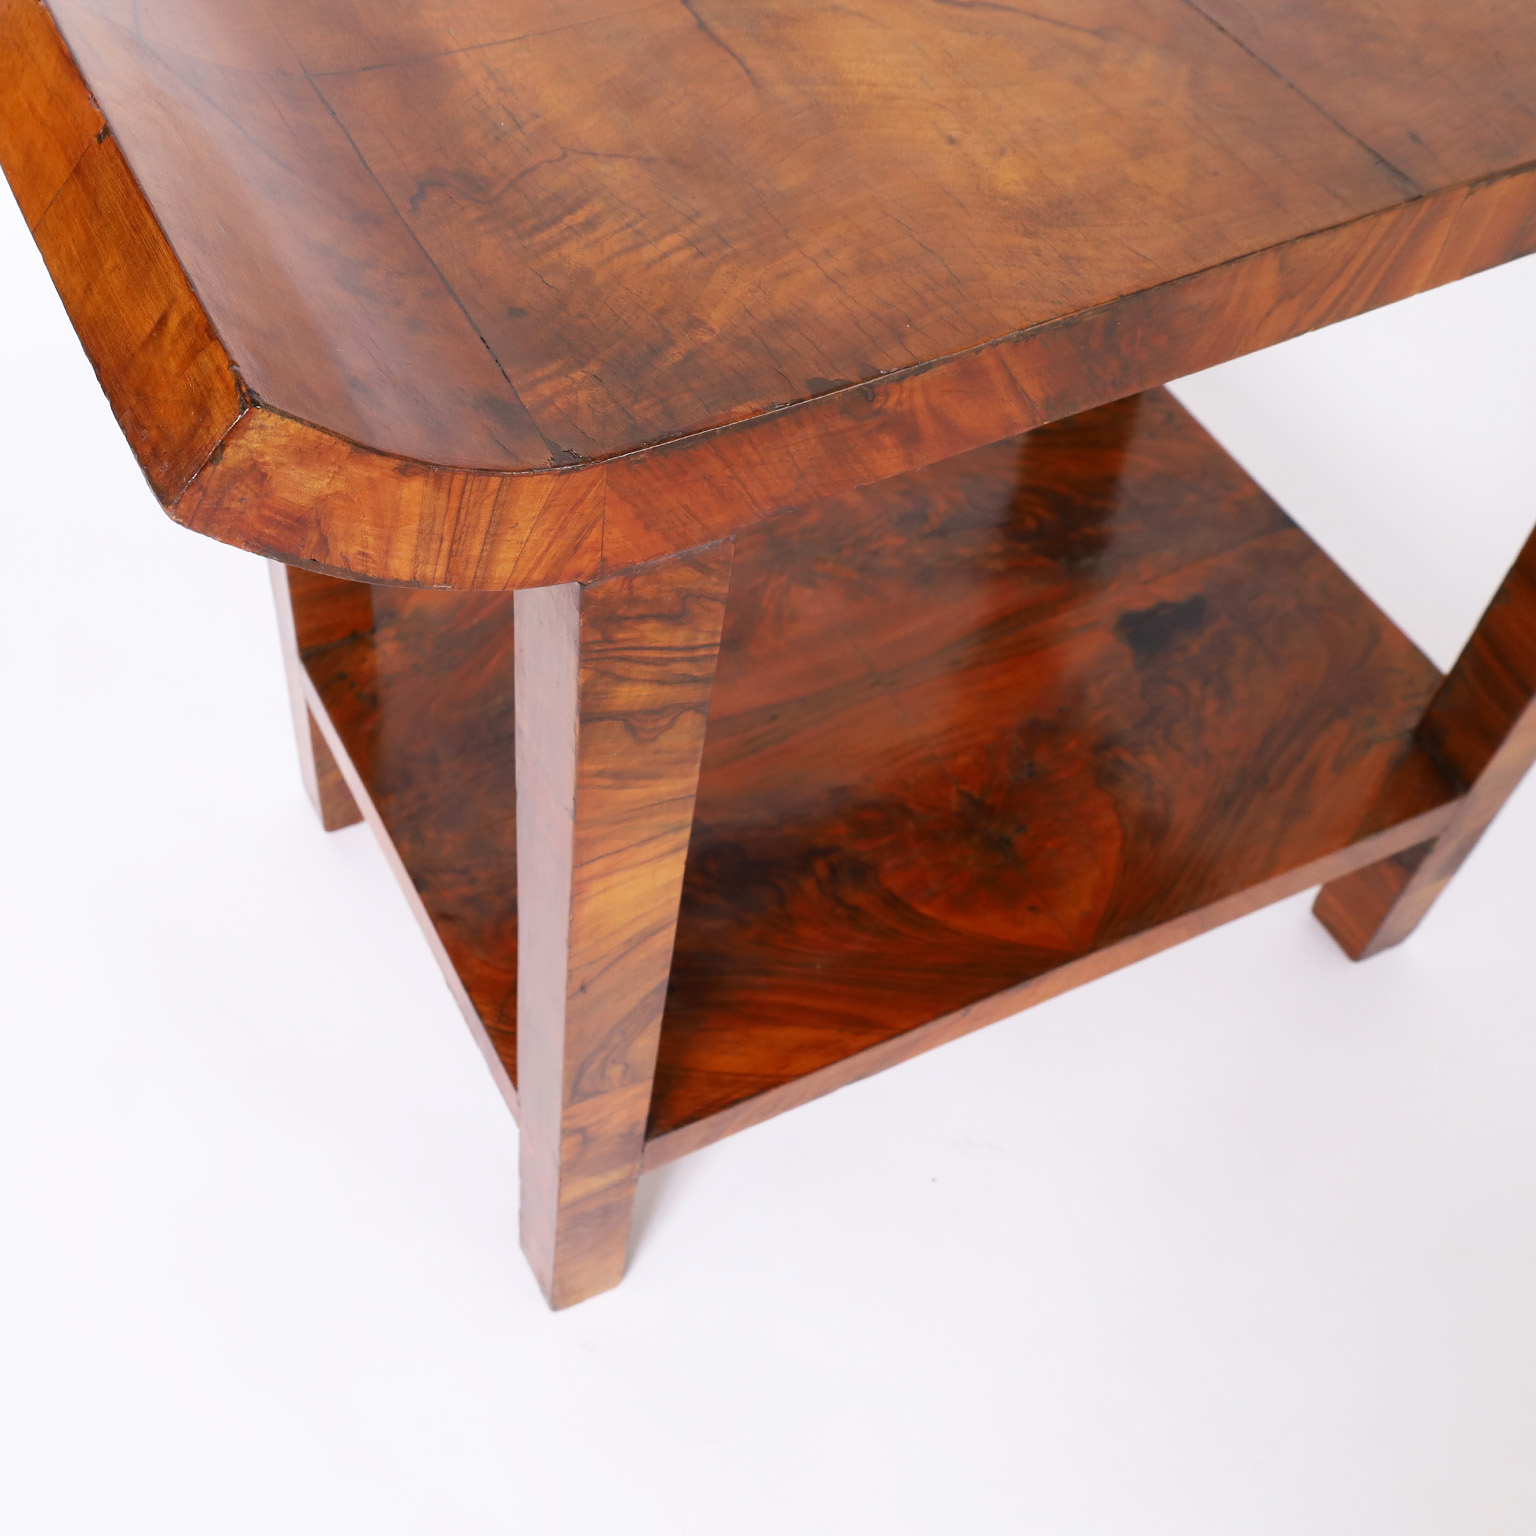 Period French Art Deco Two Tiered Walnut Table